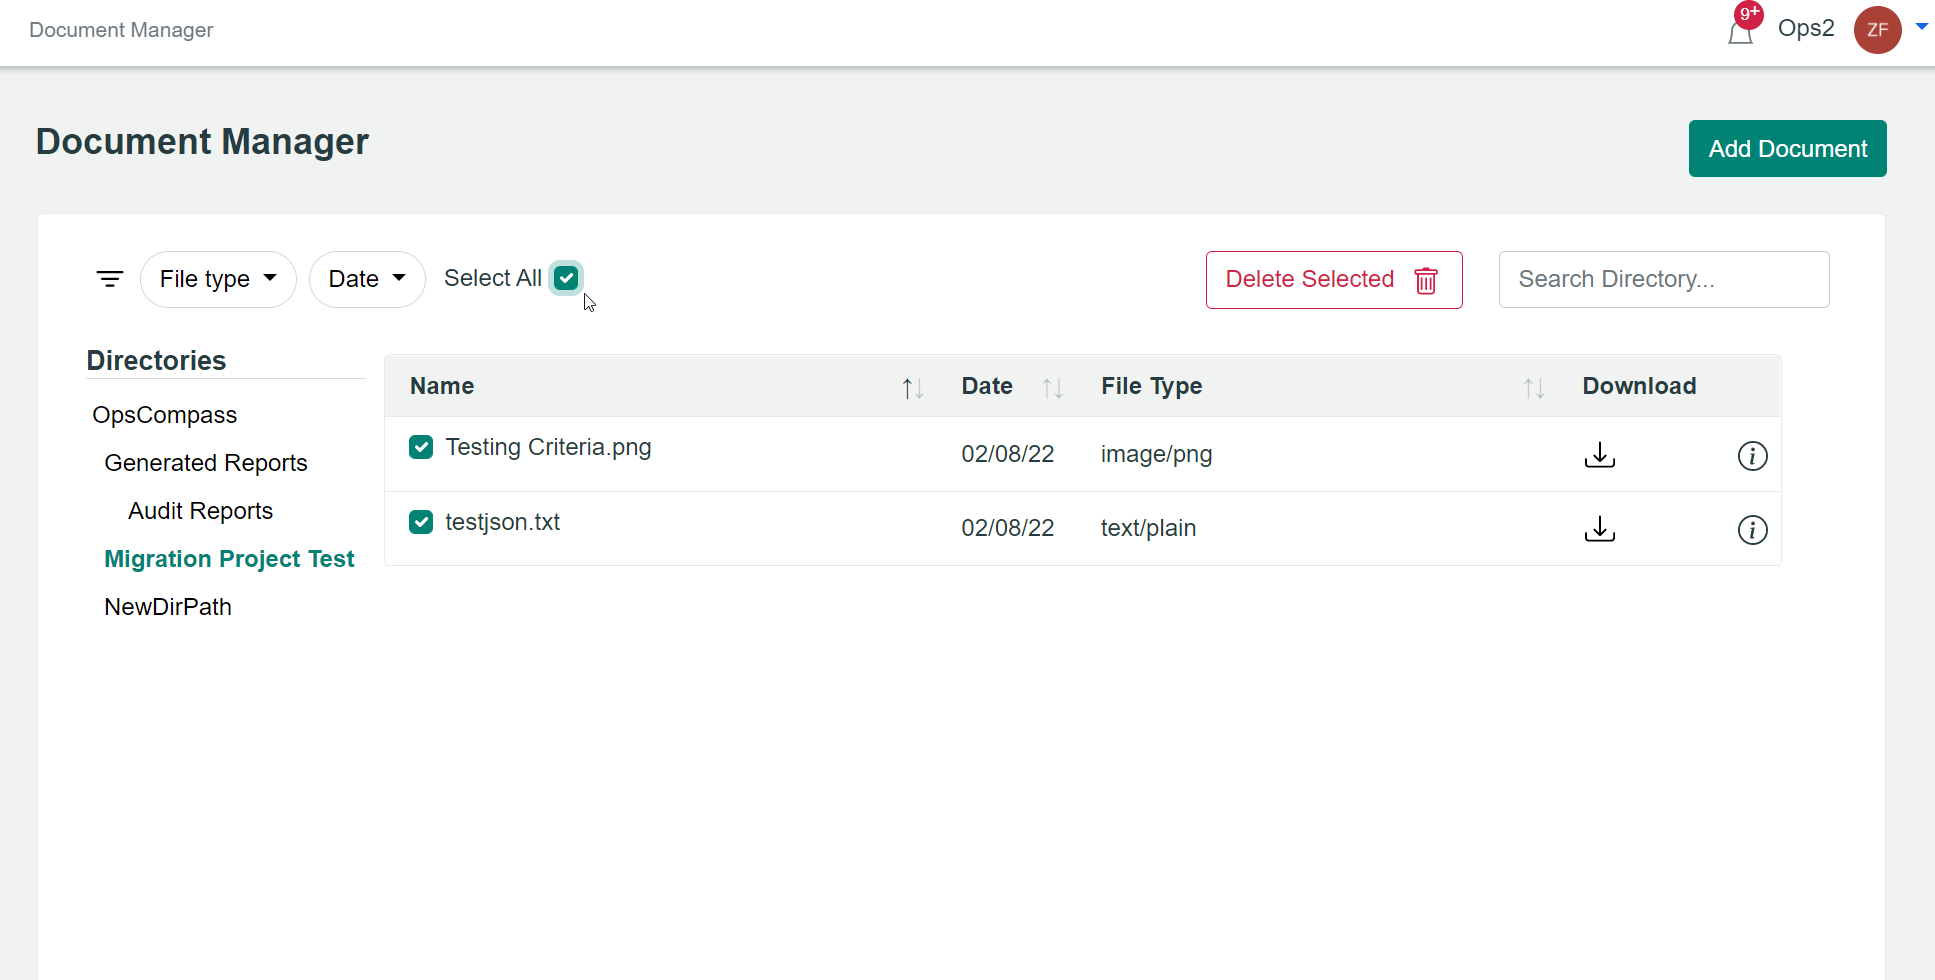 Image of the document manager with the documents selected with checkboxes.